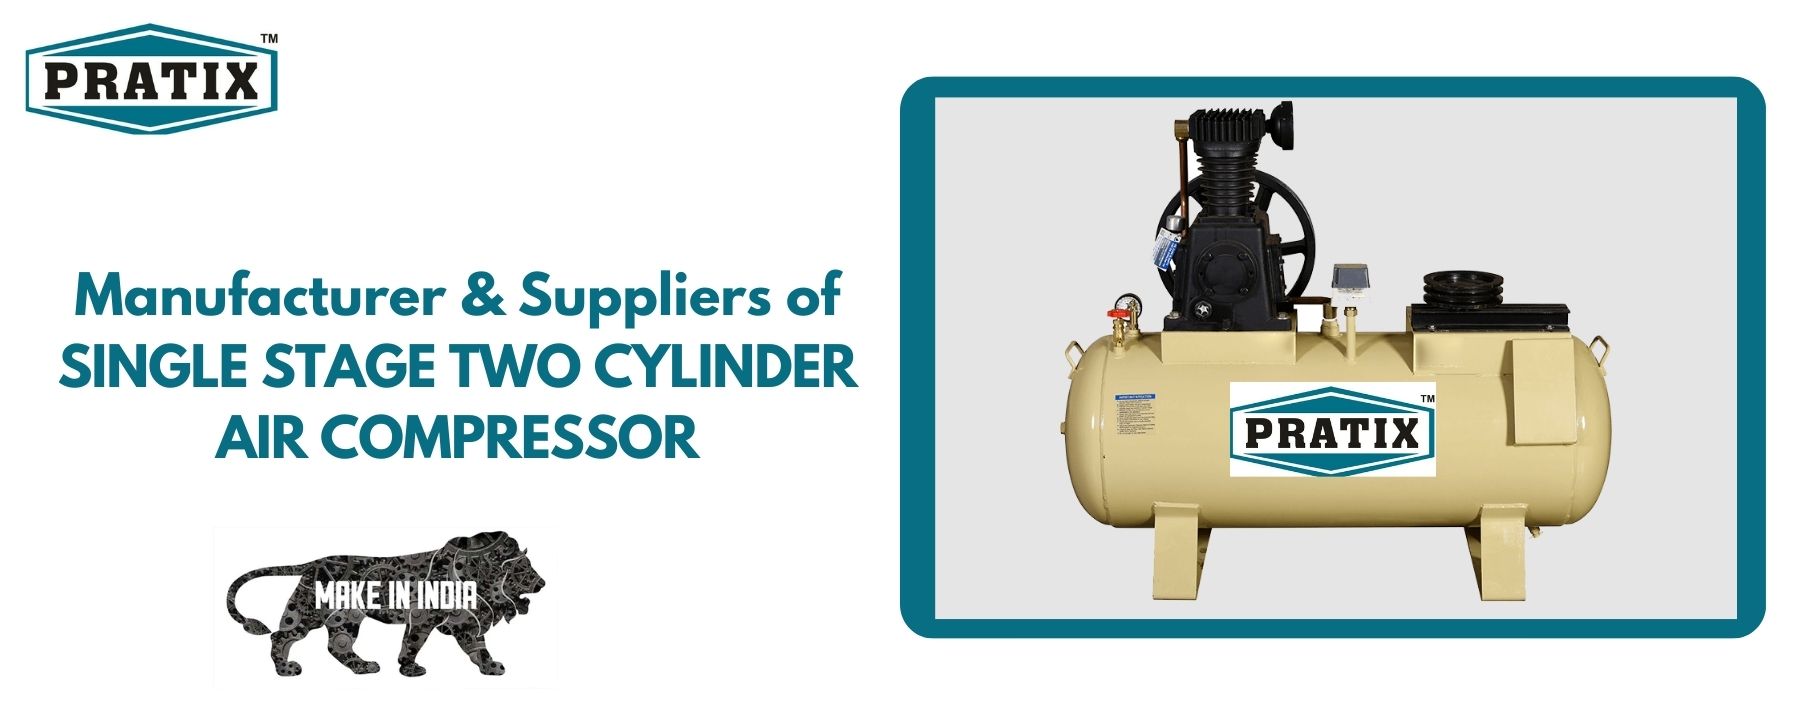 SINGLE STAGE TWO CYLINDER AIR COMPRESSOR